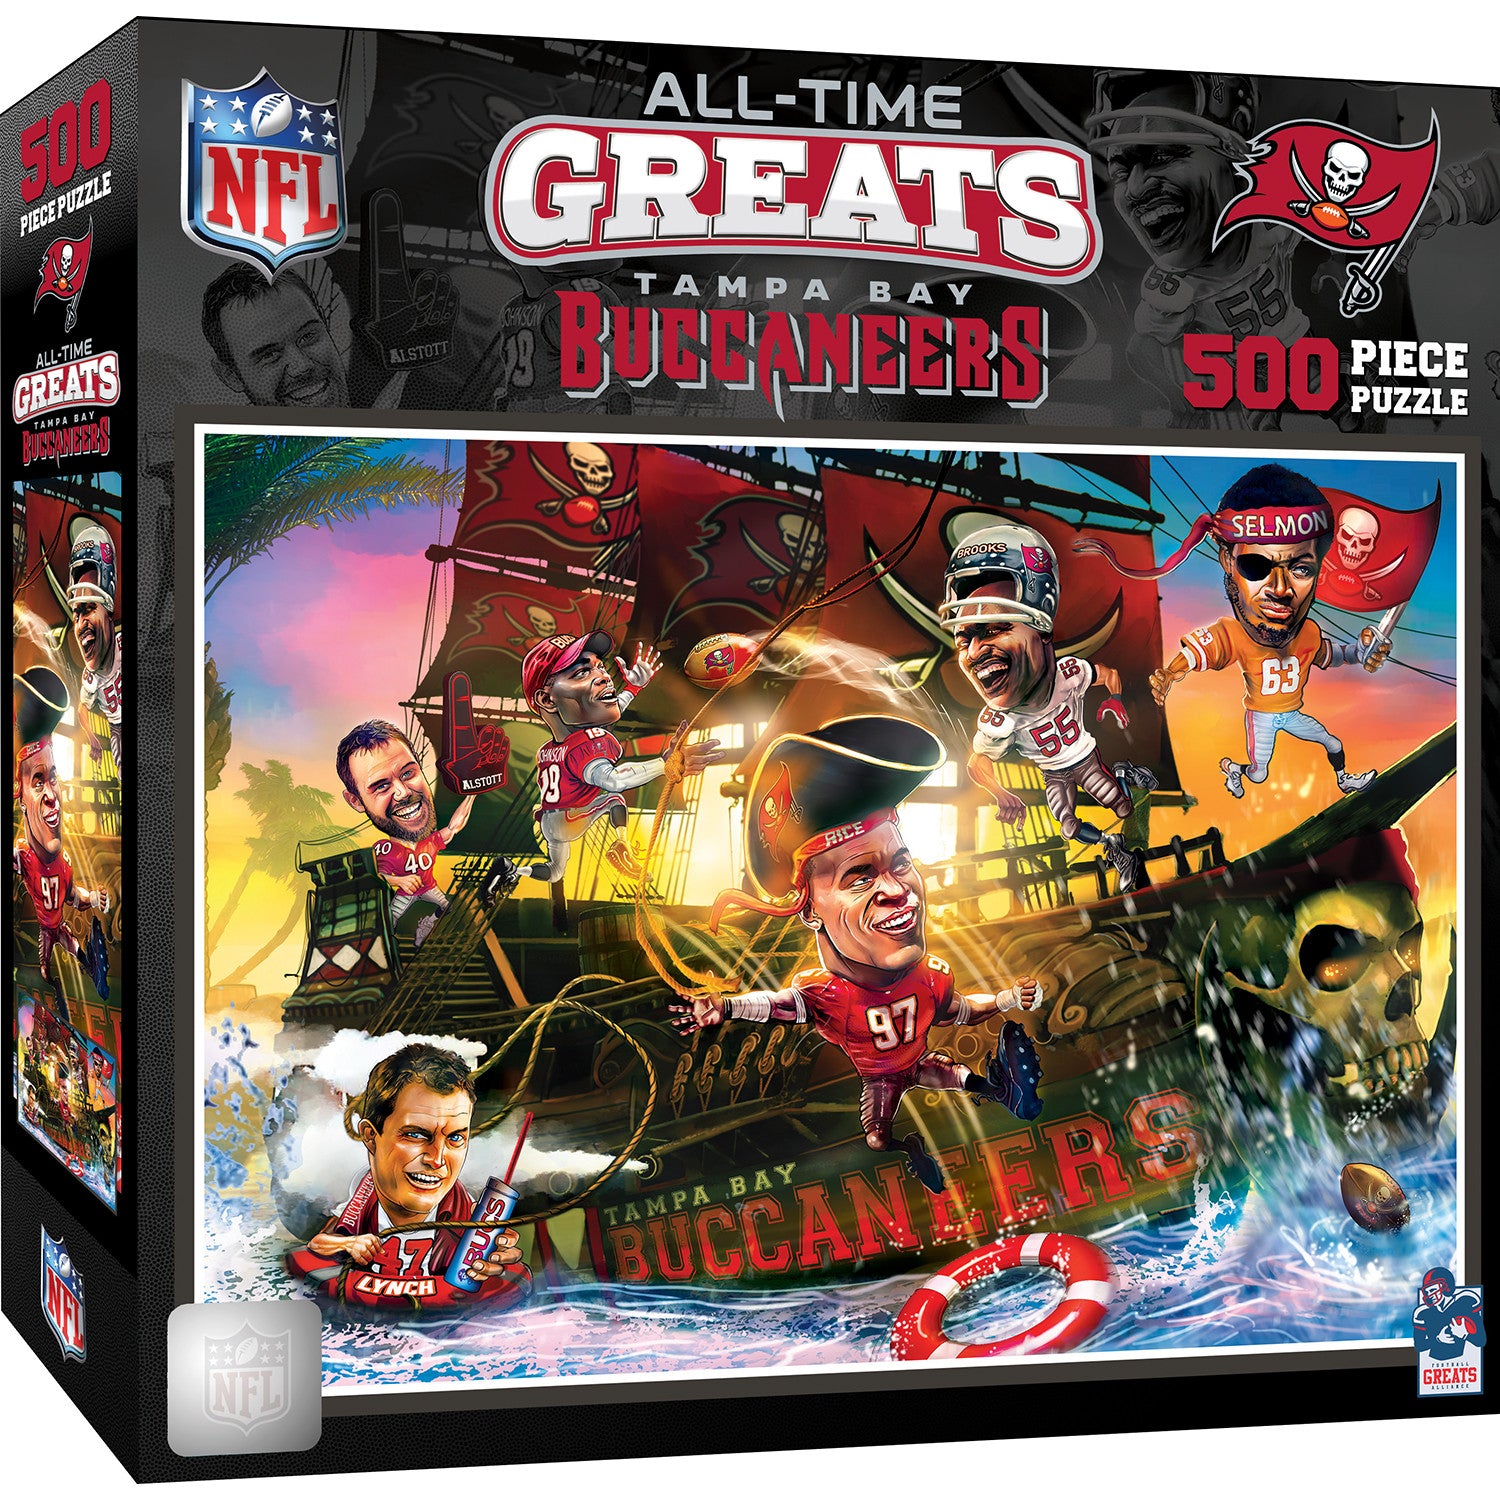 Tampa Bay Buccaneers - All Time Greats 500 Piece Jigsaw Puzzle